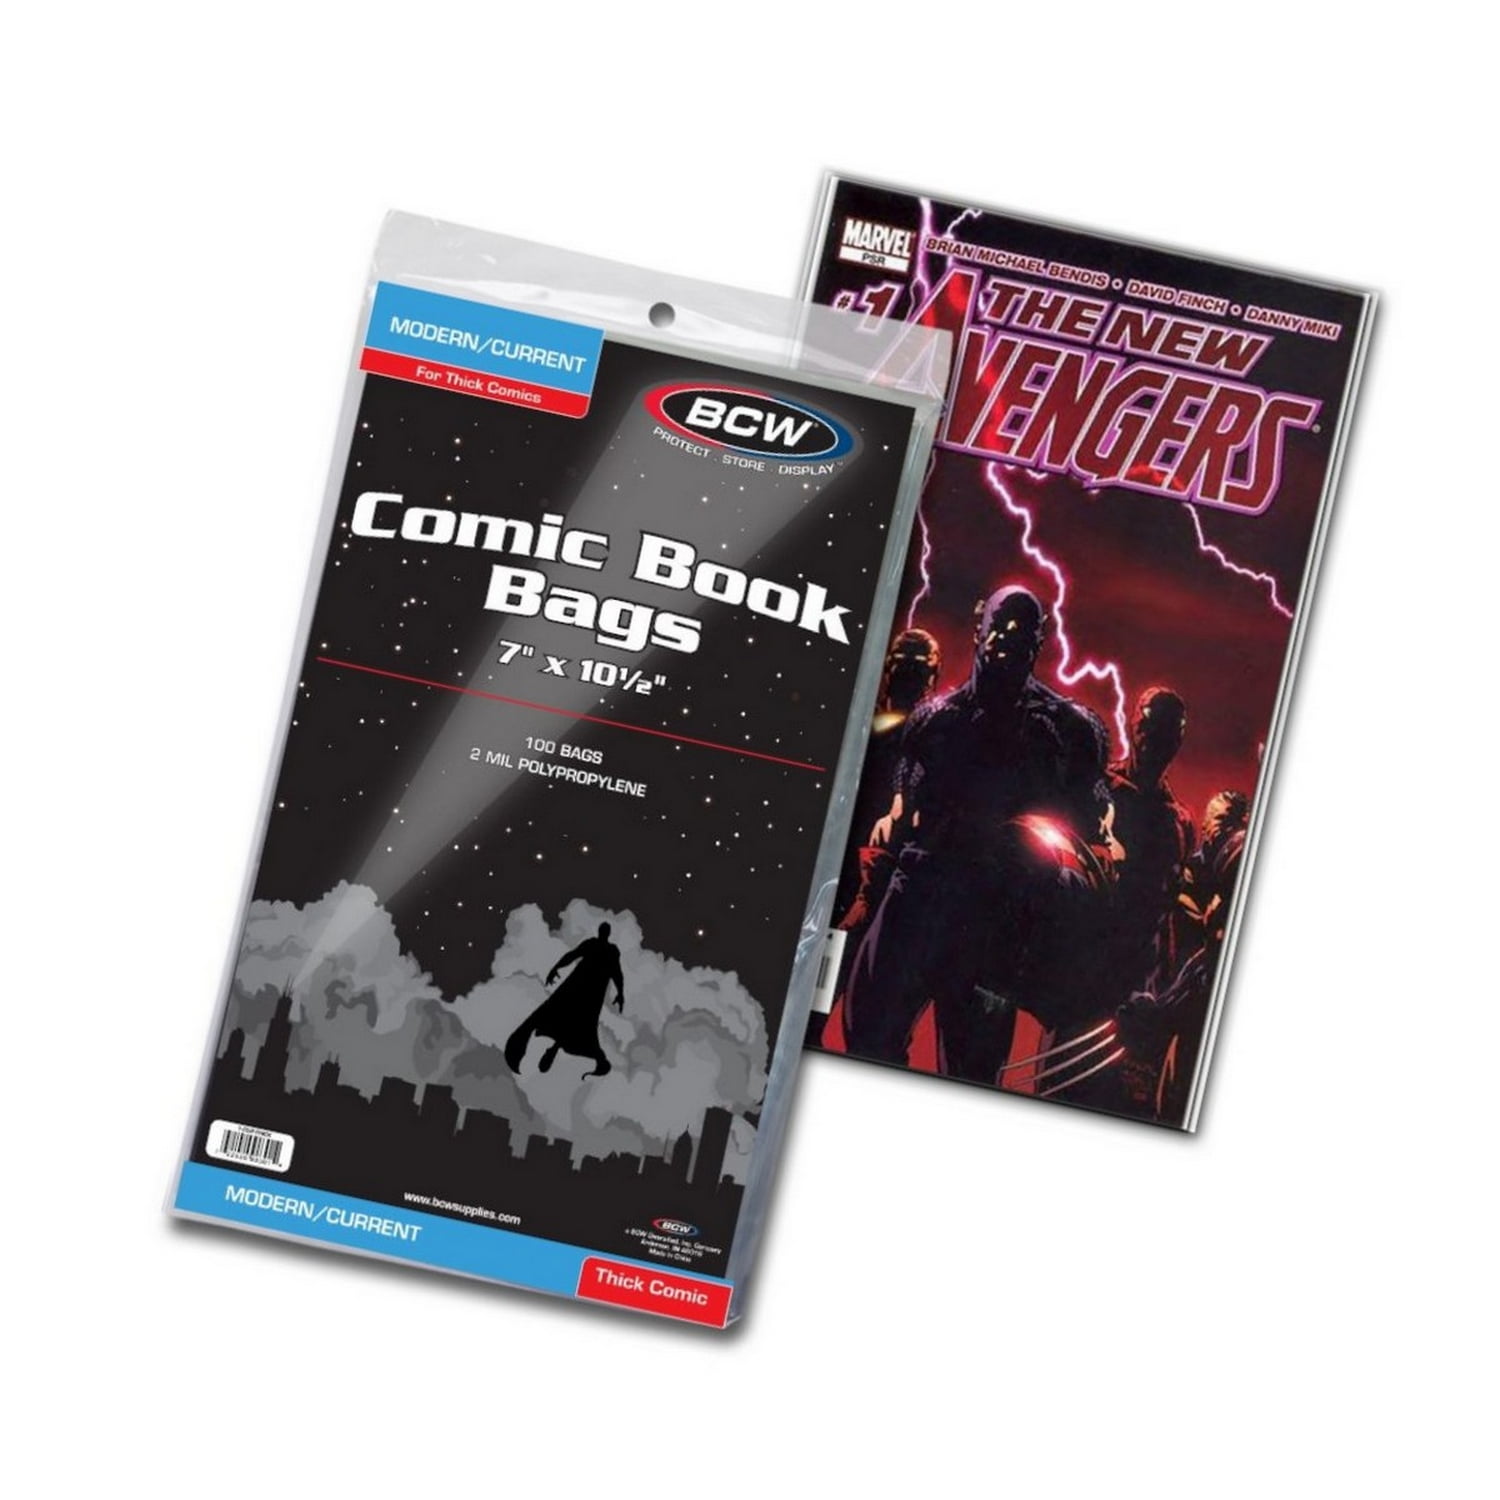 BCW Thick Modern/Current Comic Book Bags - 7 x 10 1/2 (100 Pack)